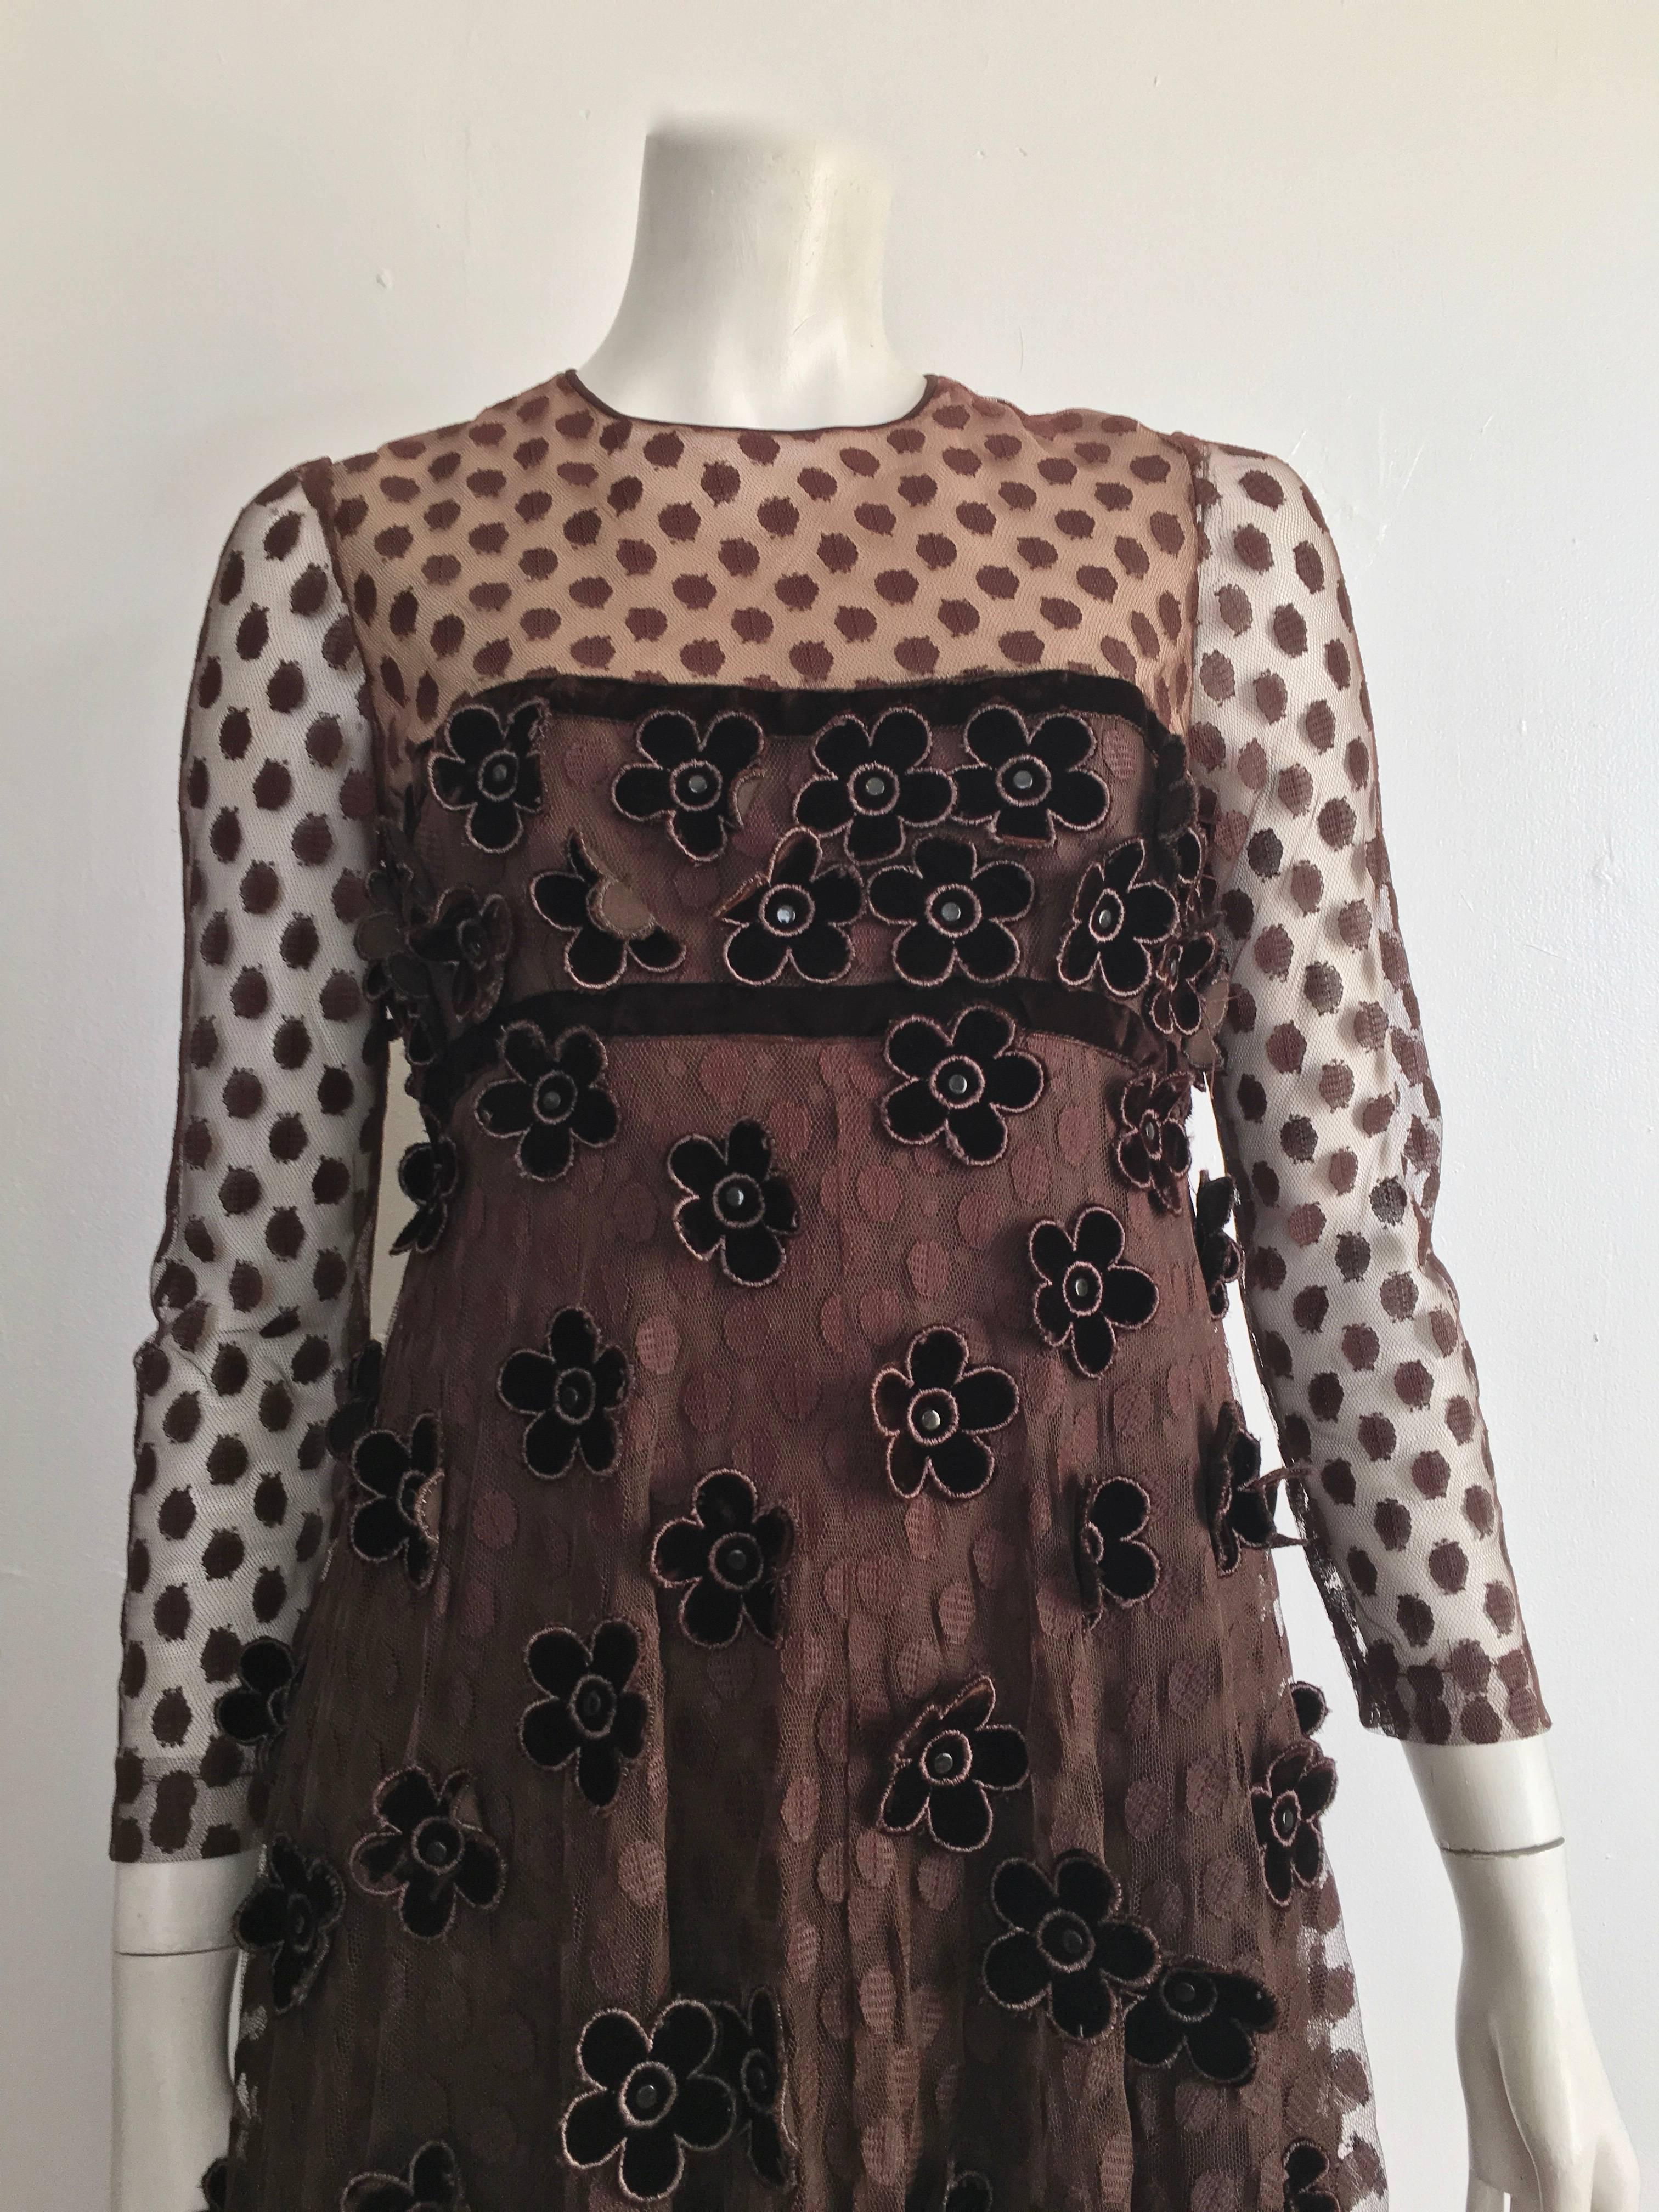 Gorgeous unknown designer 1960s chocolate brown tulle layered empire waist dress with velvet flowers maxi dress is a size 8 / 10.  The waist on this maxi dress is 32